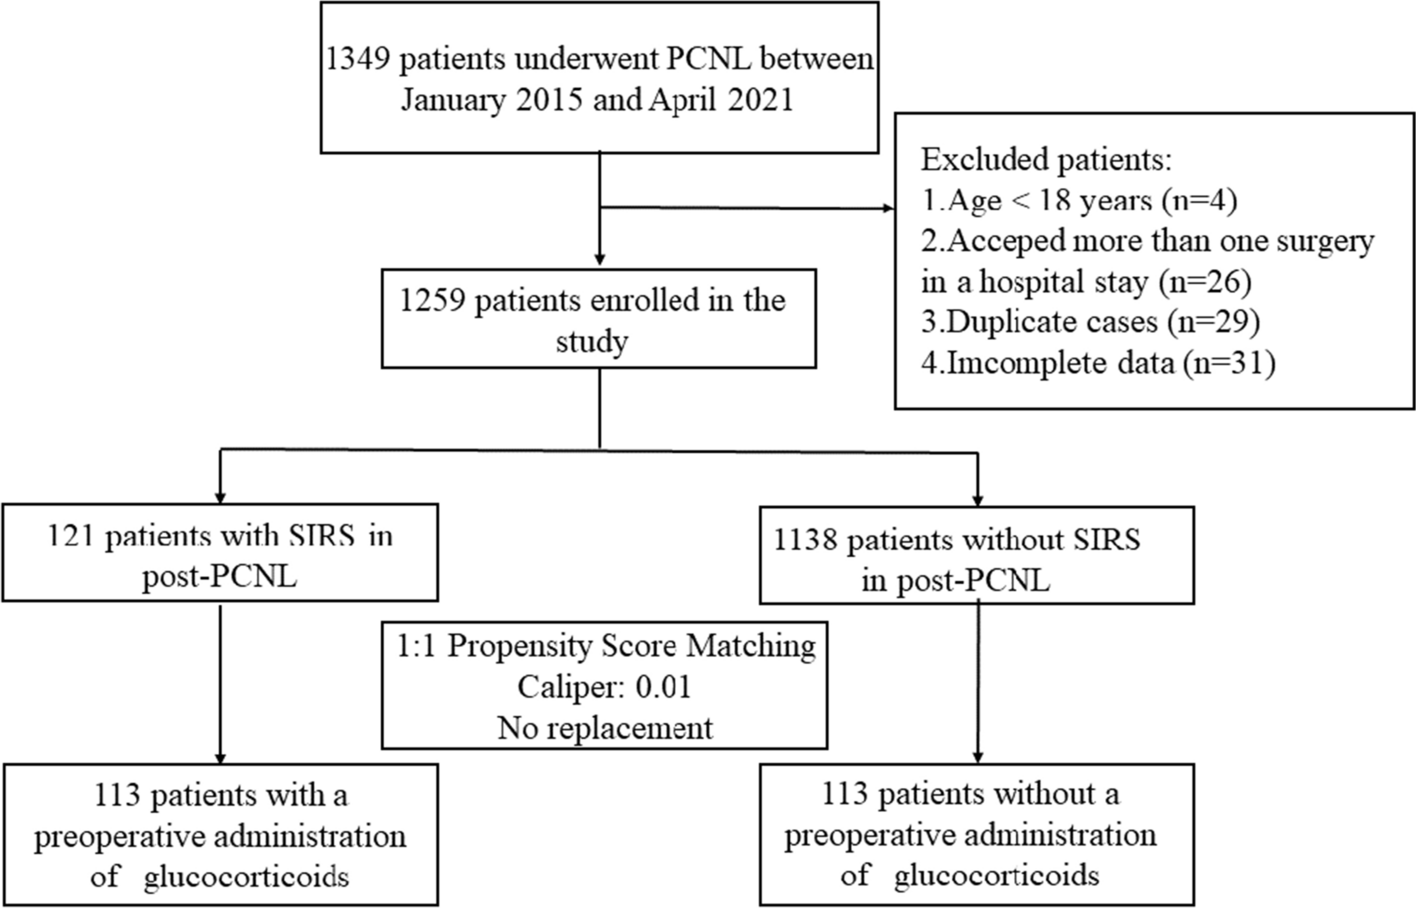 Risk of Systemic Inflammatory Response Syndrome Following Preoperative Glucocorticoids Administration in Patients After Percutaneous Nephrolithotomy: A Retrospective Cohort Study